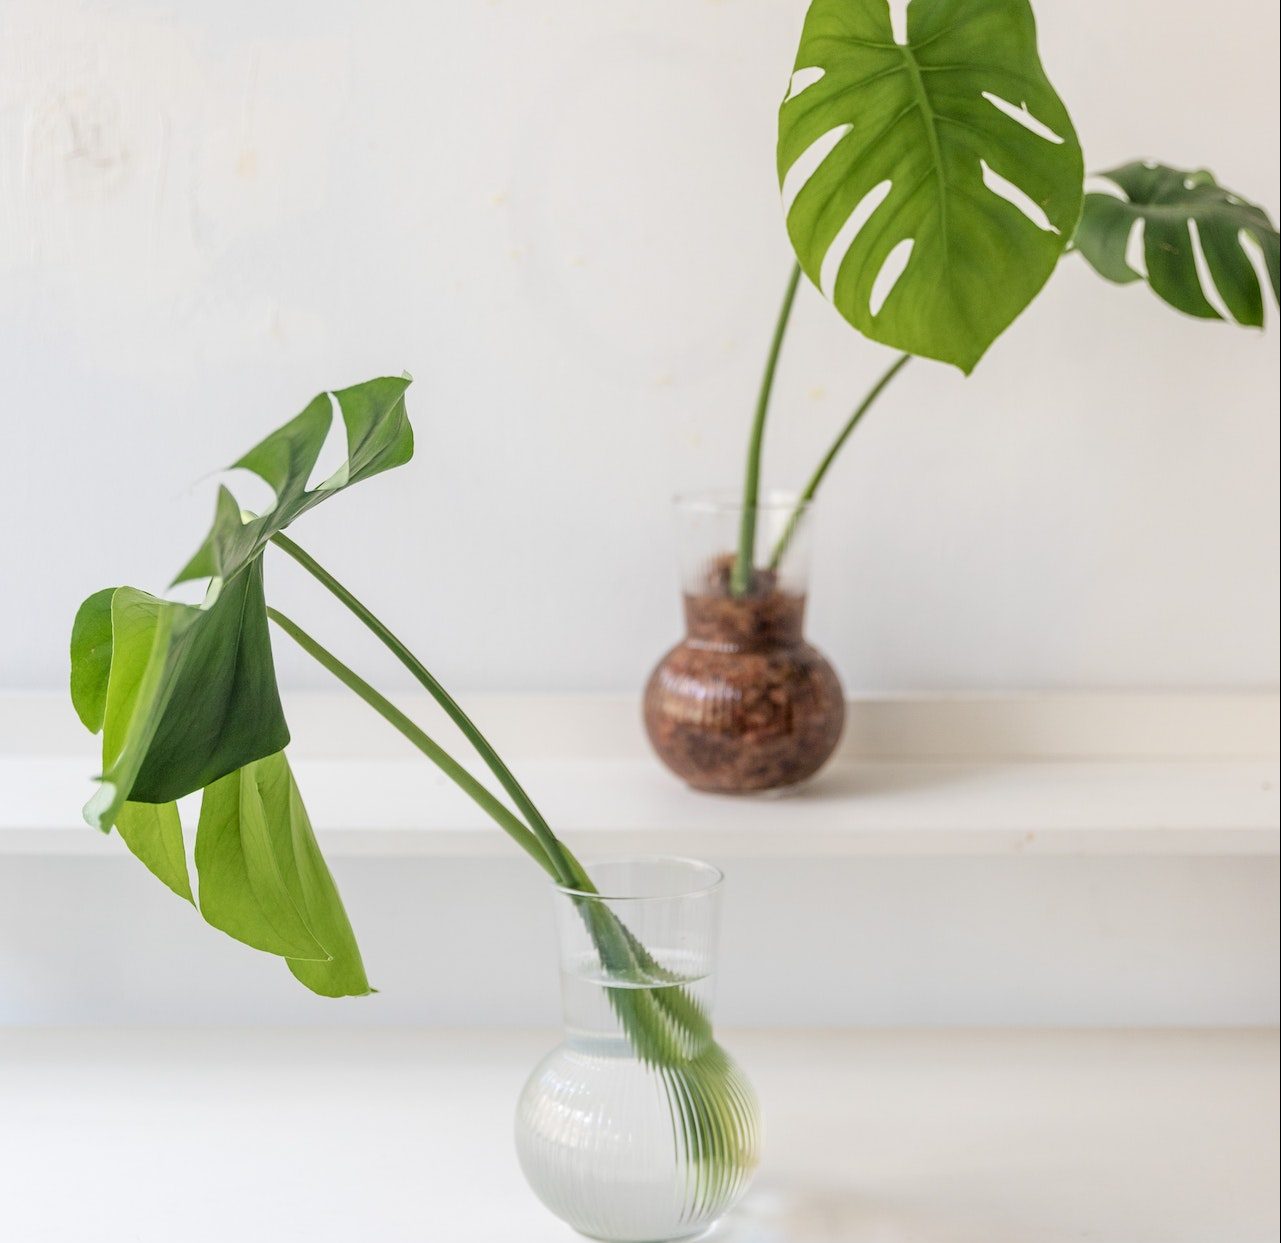 Propagating Monstera Deliciousa in Water or Soil?